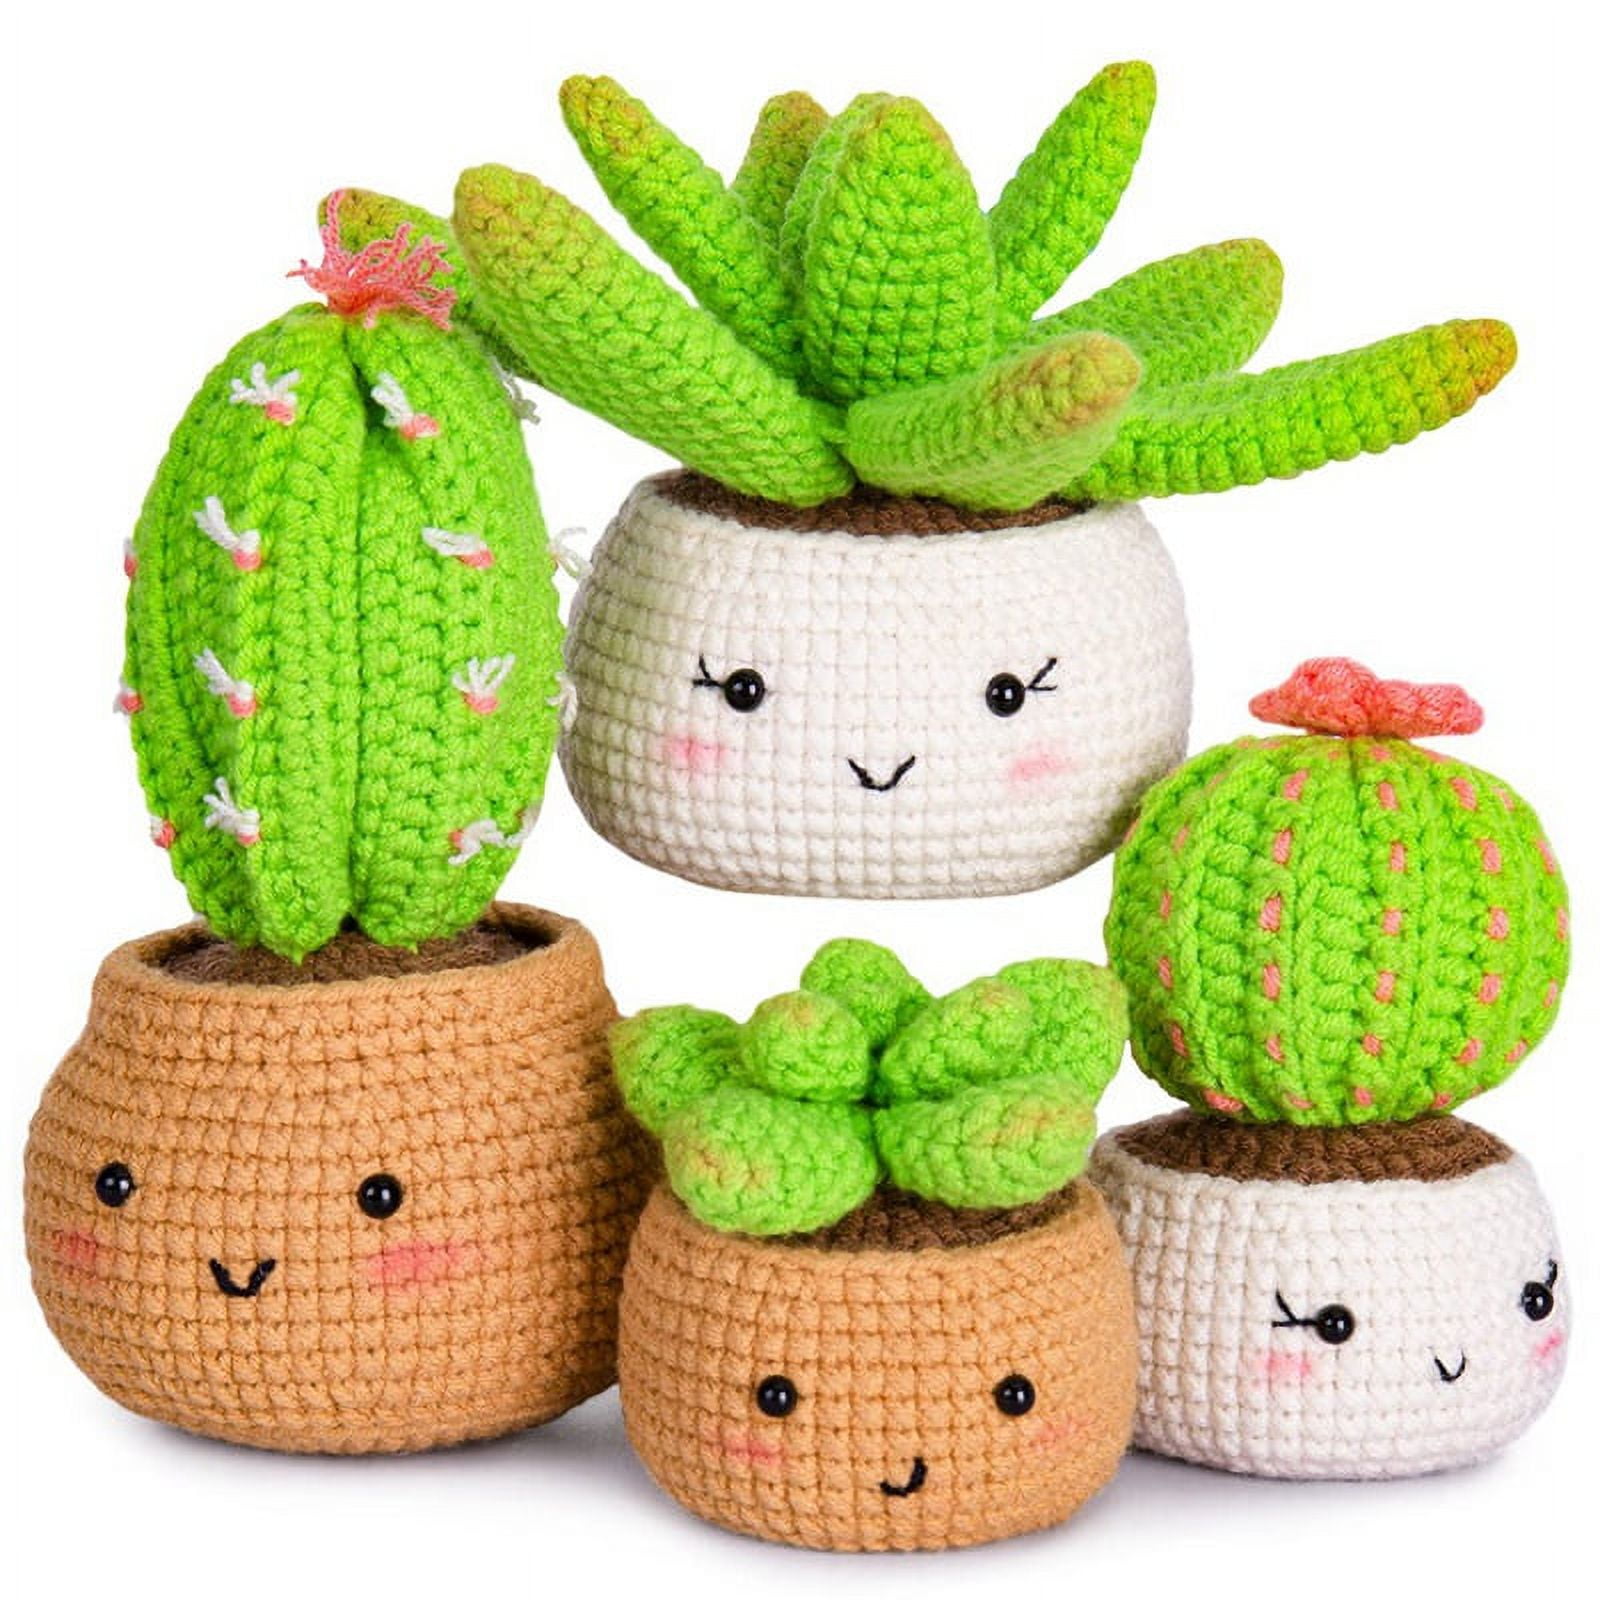 Karsspor Crochet Kit for Beginners Adults - 6 PCS Succulents, Beginner  Crochet Kit with Step-by-Step Instructions and Video Tutorials, Complete